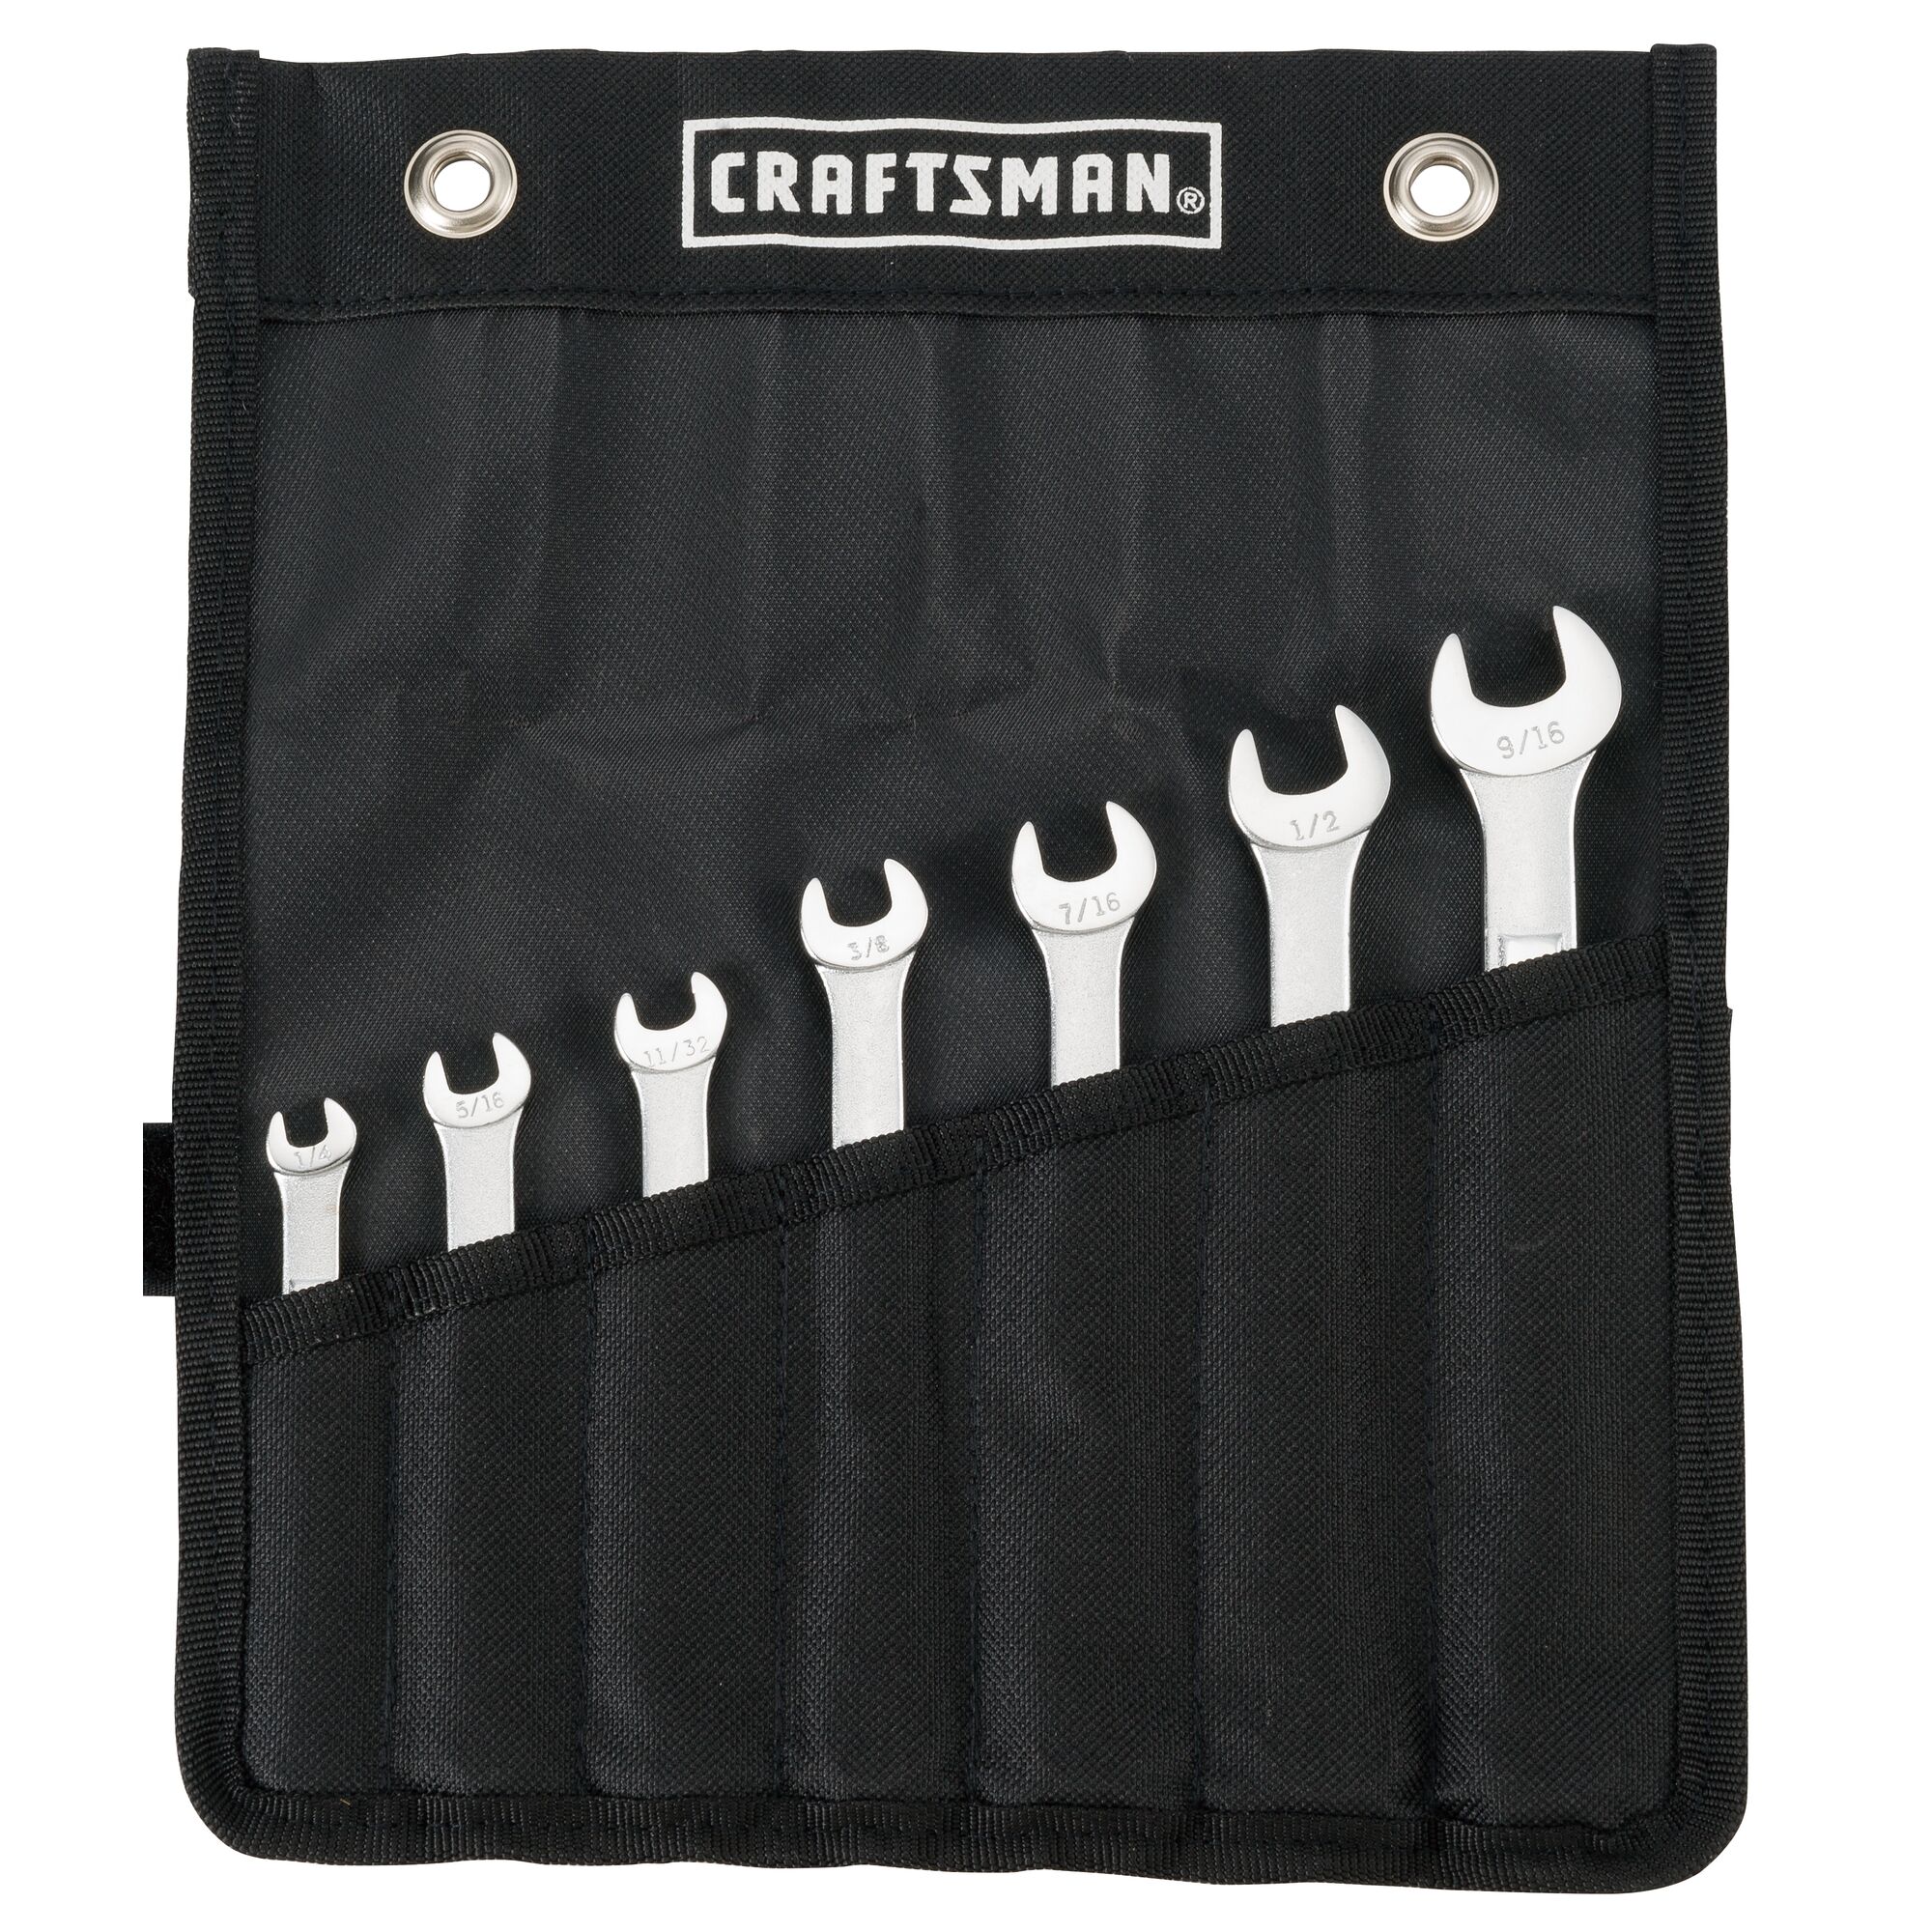 S A E 12 p t 7 piece wrench set in pouch.